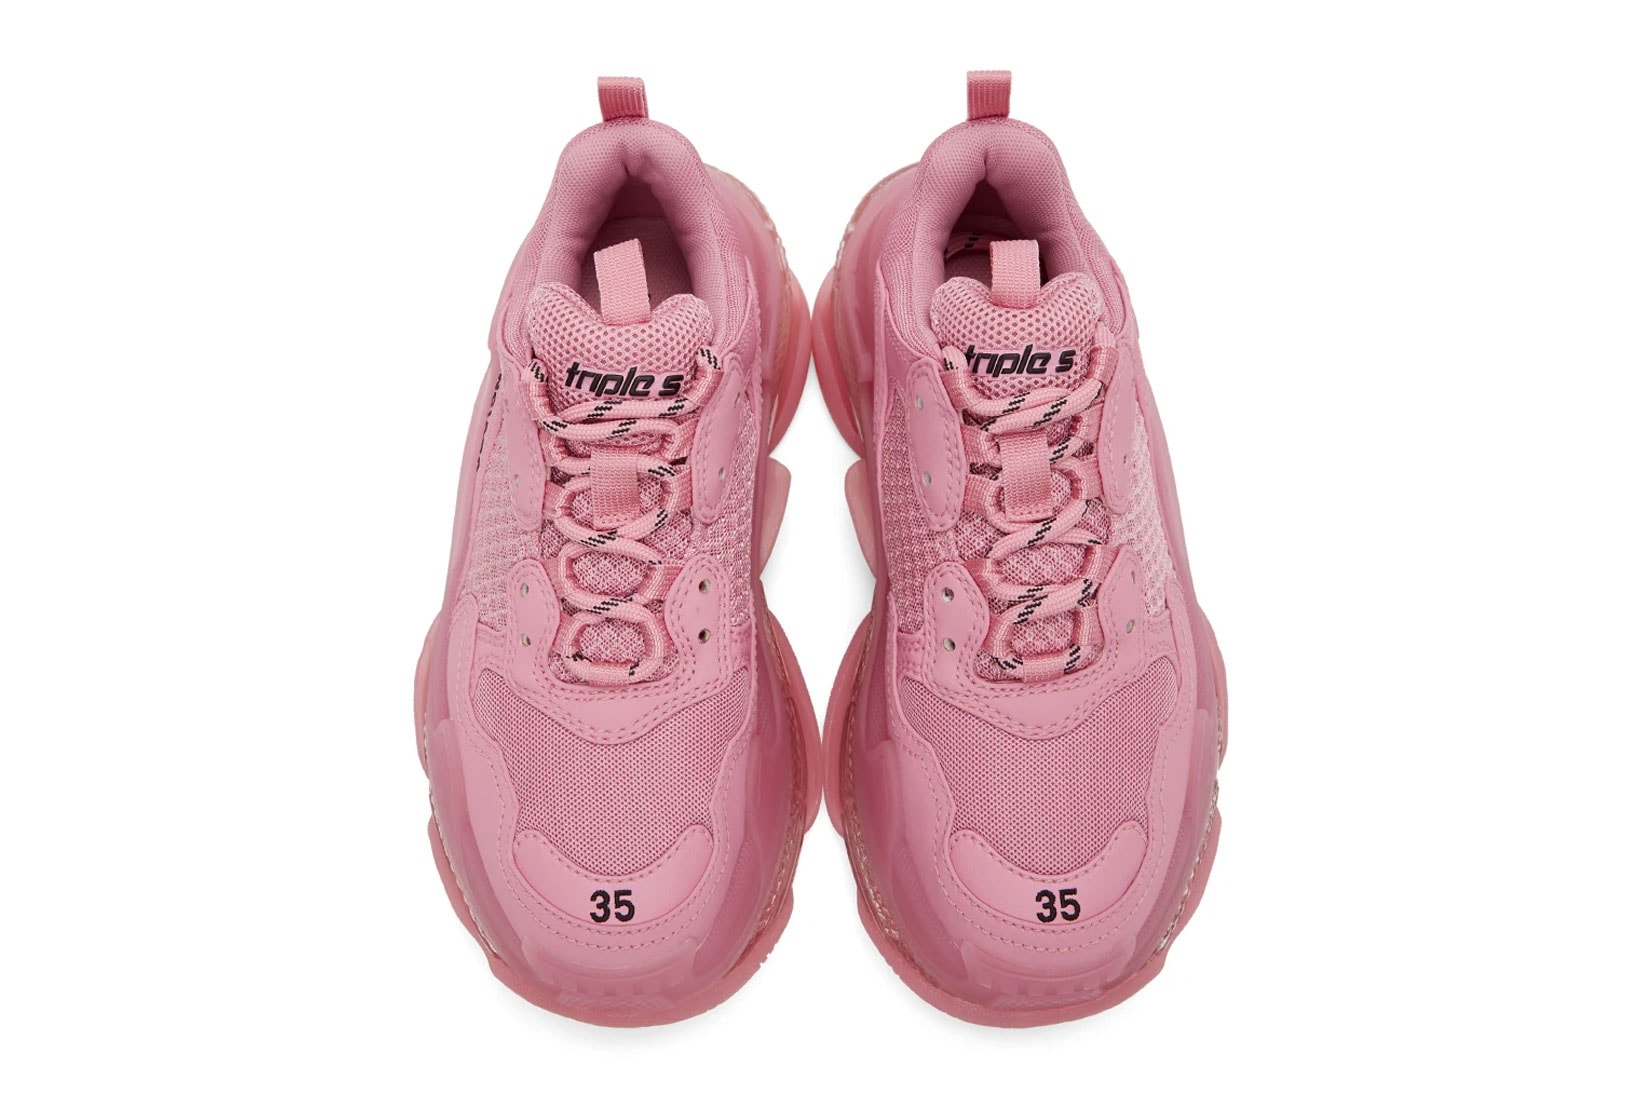 balenciaga triple s pink pastel womens chunky ugly sneakers price release